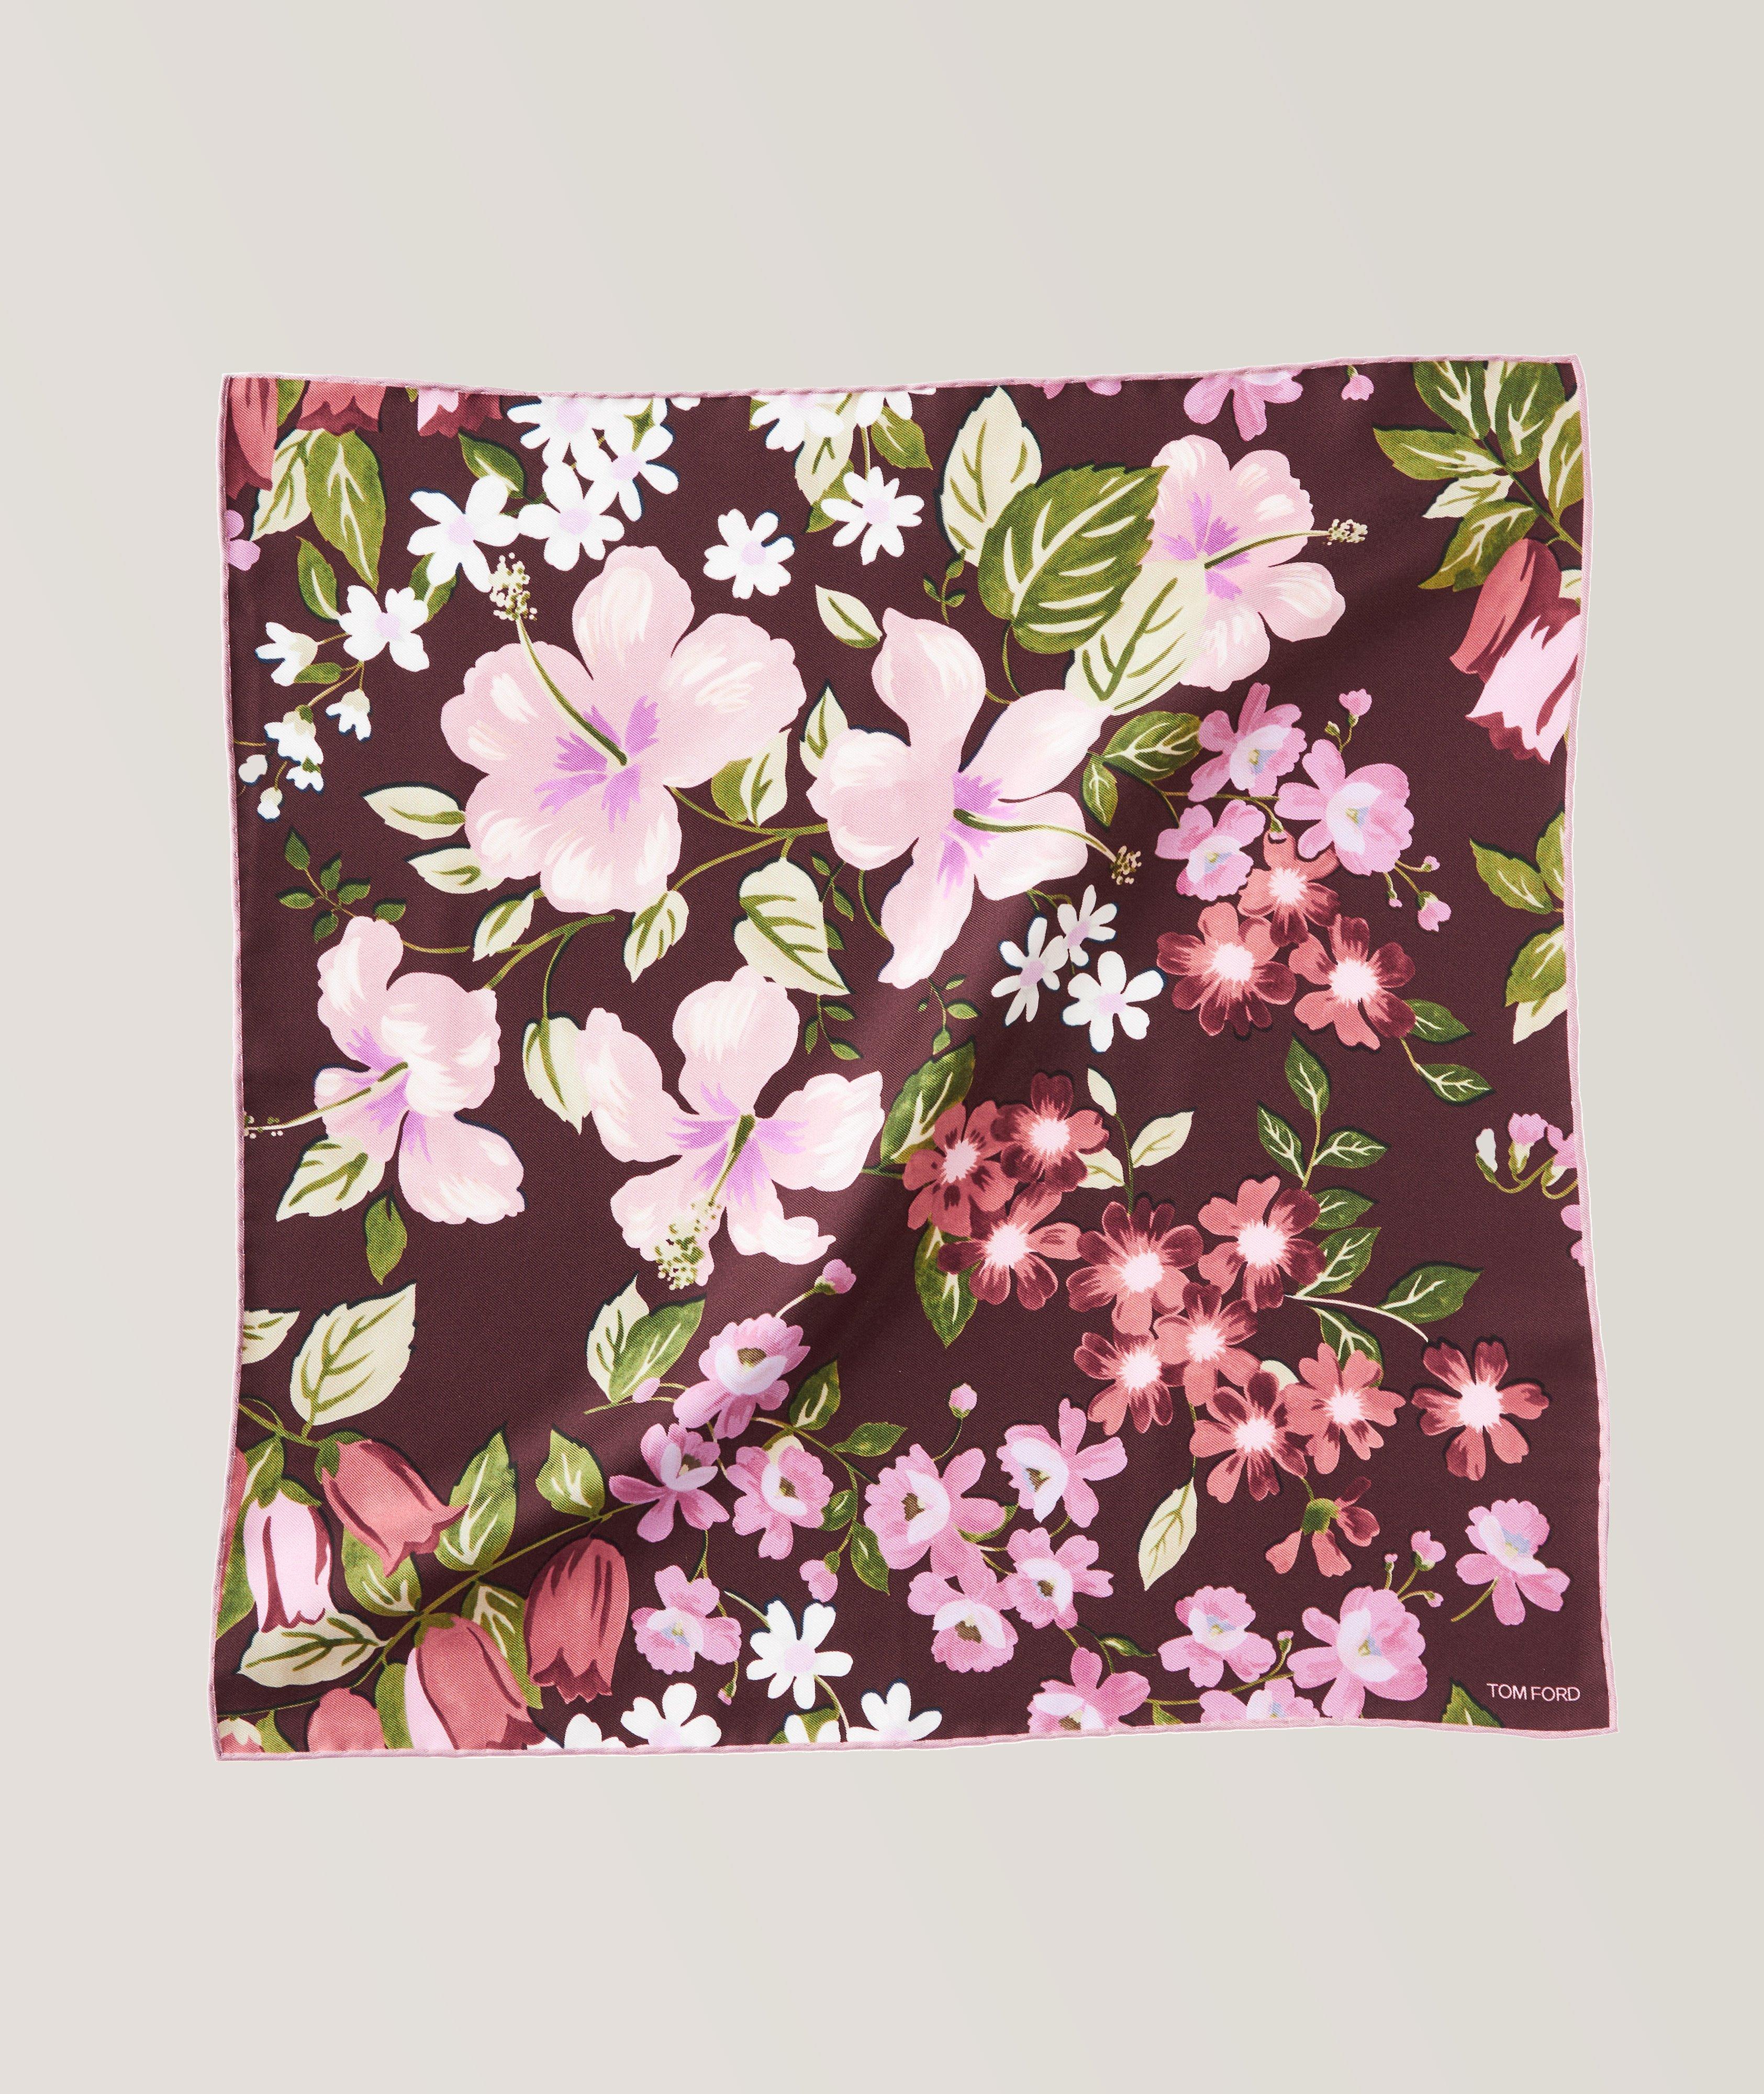 TOM FORD Hand Painted Floral Silk Pocket Square